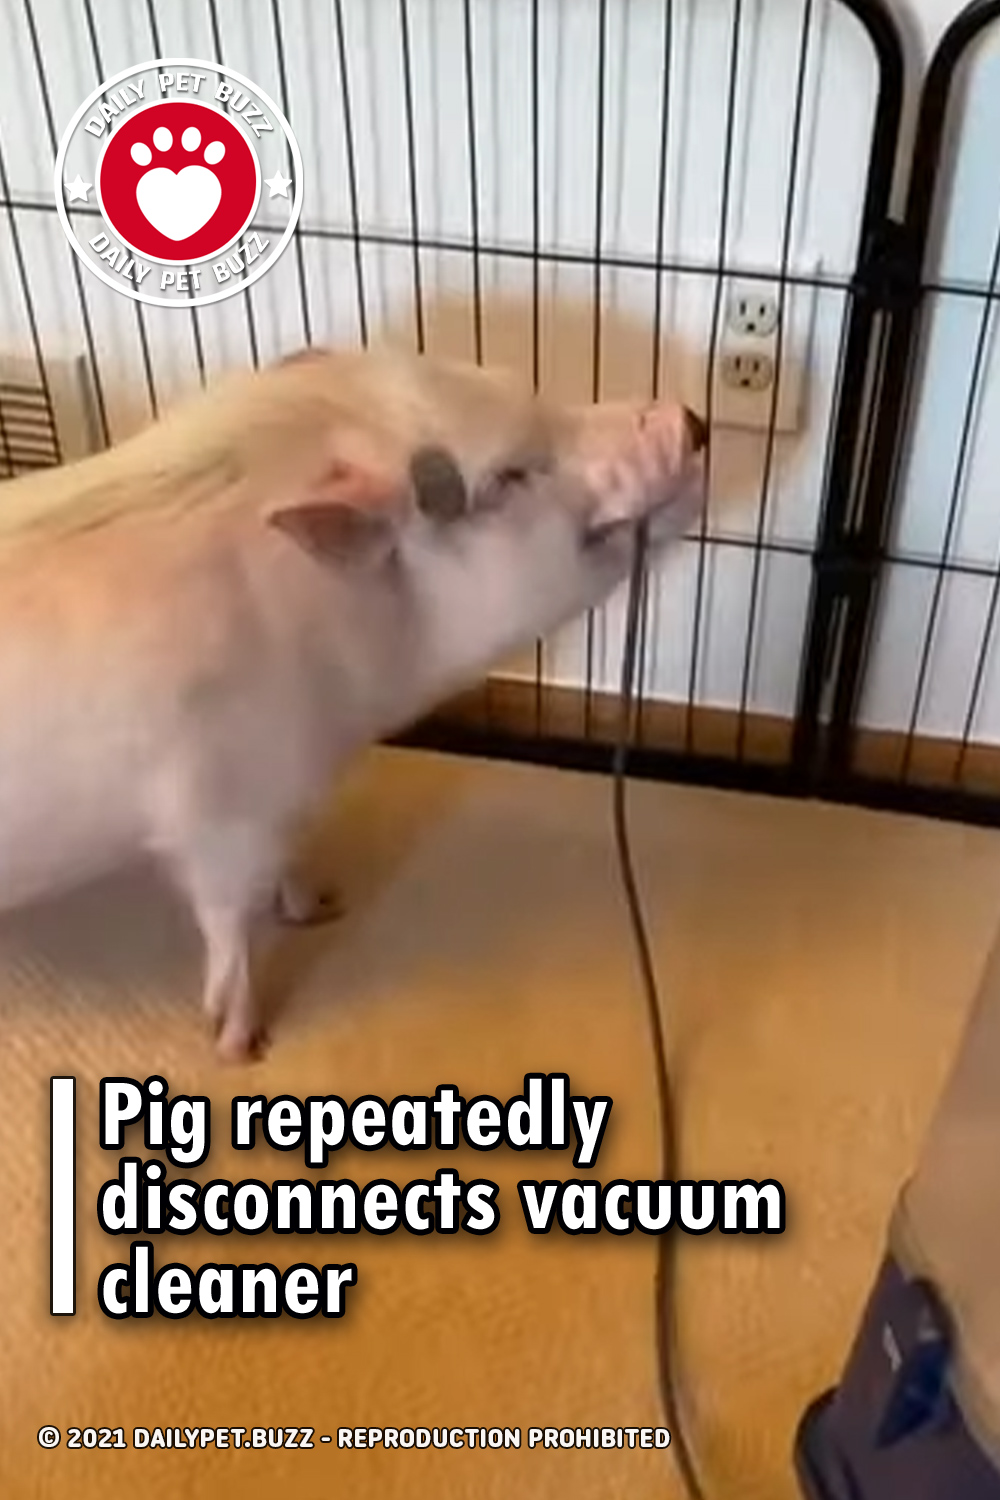 Pig repeatedly disconnects vacuum cleaner